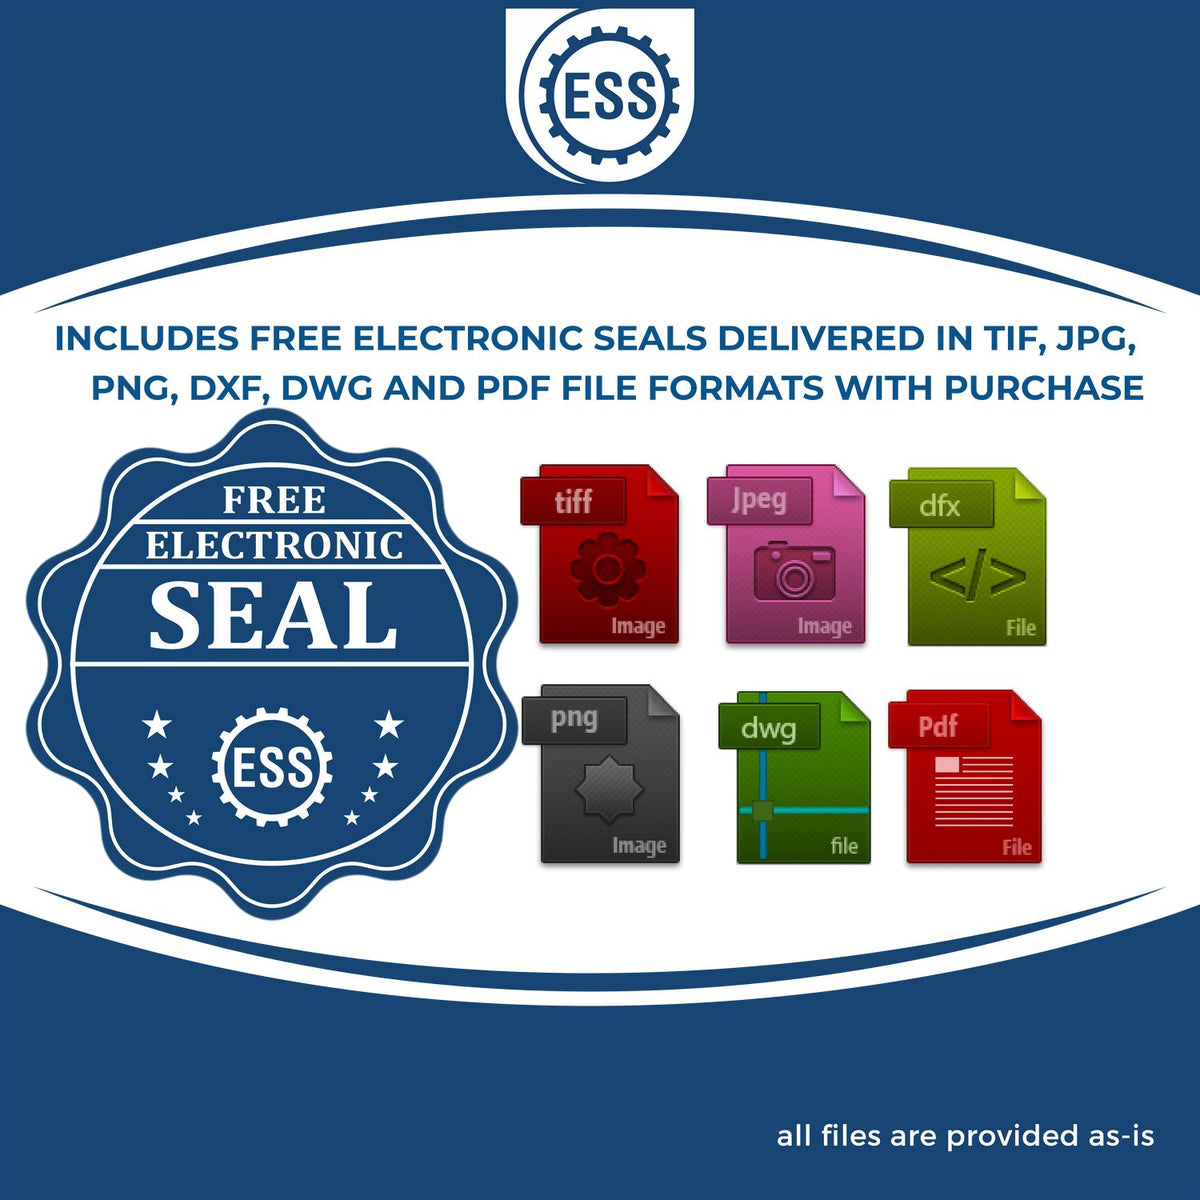 An infographic for the free electronic seal for the Premium MaxLight Pre-Inked Illinois Engineering Stamp illustrating the different file type icons such as DXF, DWG, TIF, JPG and PNG.